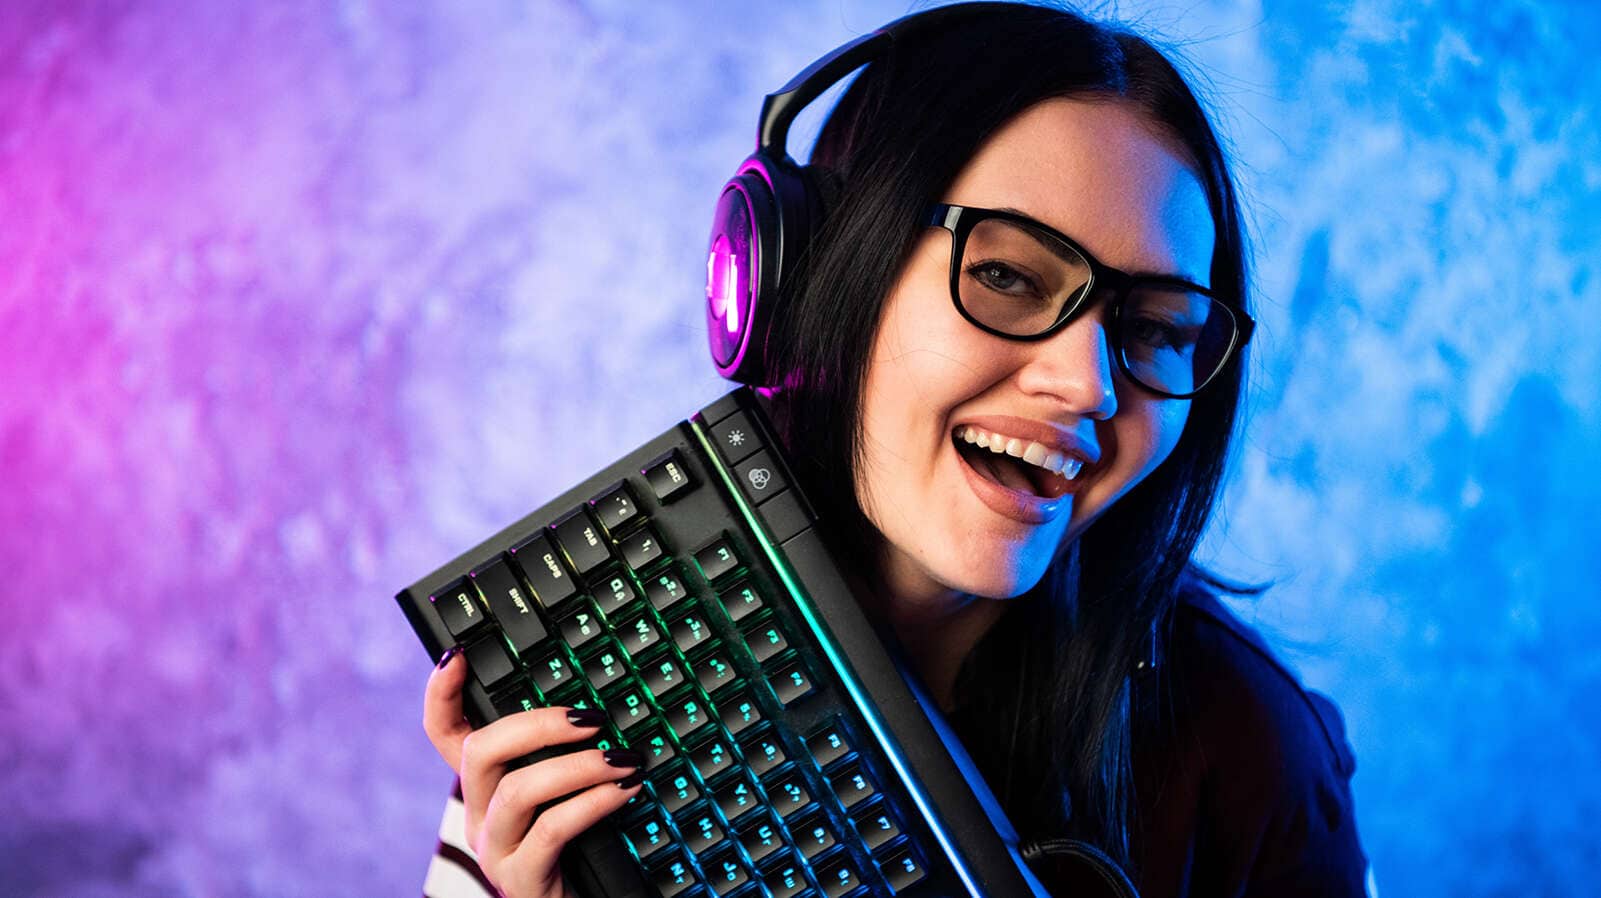 A PC Gamer holding a keyboard